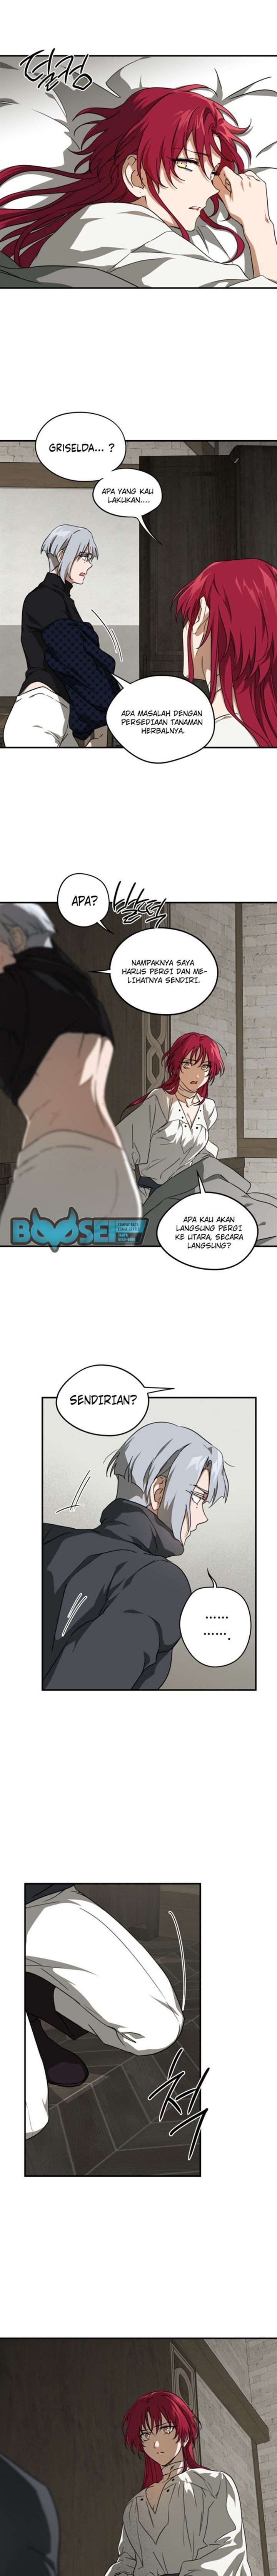 Blinded by the Setting Sun Chapter 51